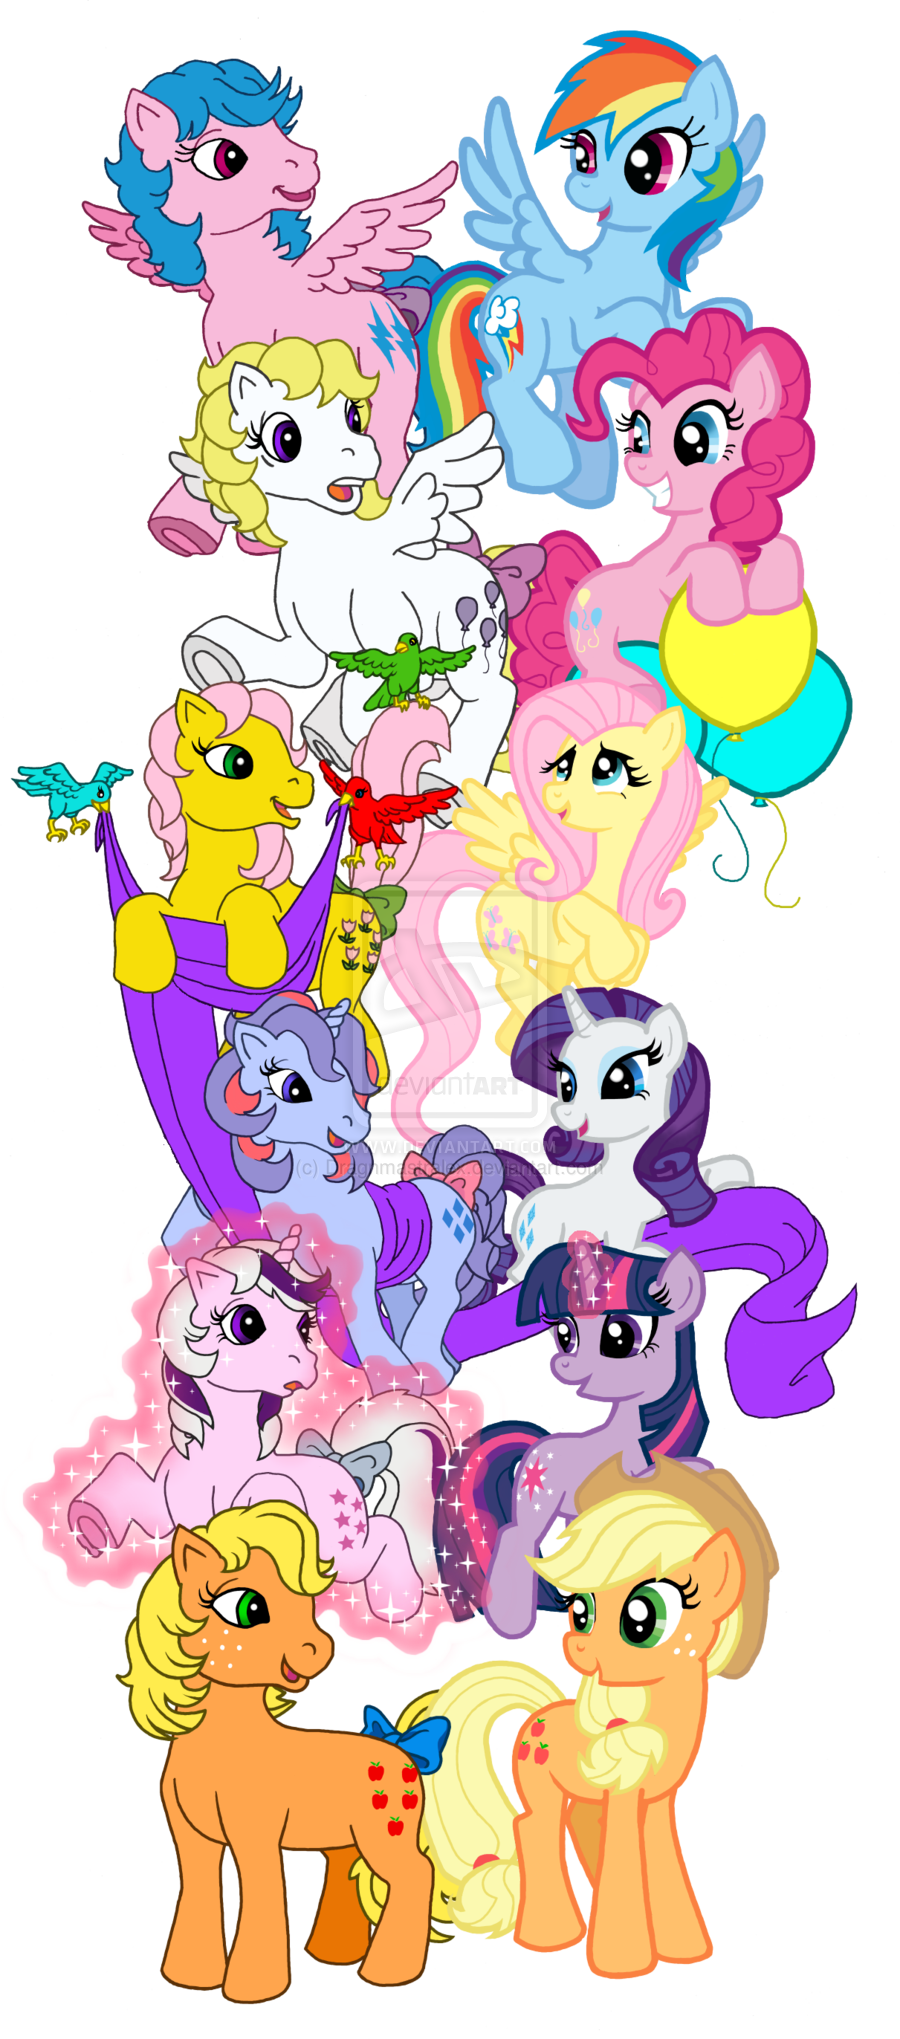 blue_fur cowboy_hat cutie_mark dragnmastralex dragon equine female feral firefly_(mlp) fluttershy_(mlp) friendship_is_magic fur g1 hair hat horn horse mammal multi-colored_hair my_little_pony pegasus pink_fur pink_hair pinkie_pie_(mlp) pony posey_(mlp) purple_hair rainbow_dash_(mlp) rainbow_hair sparkler_(mlp) square_crossover surprise_(mlp) twilight_(mlp) twilight_sparkle_(mlp) unicorn wings